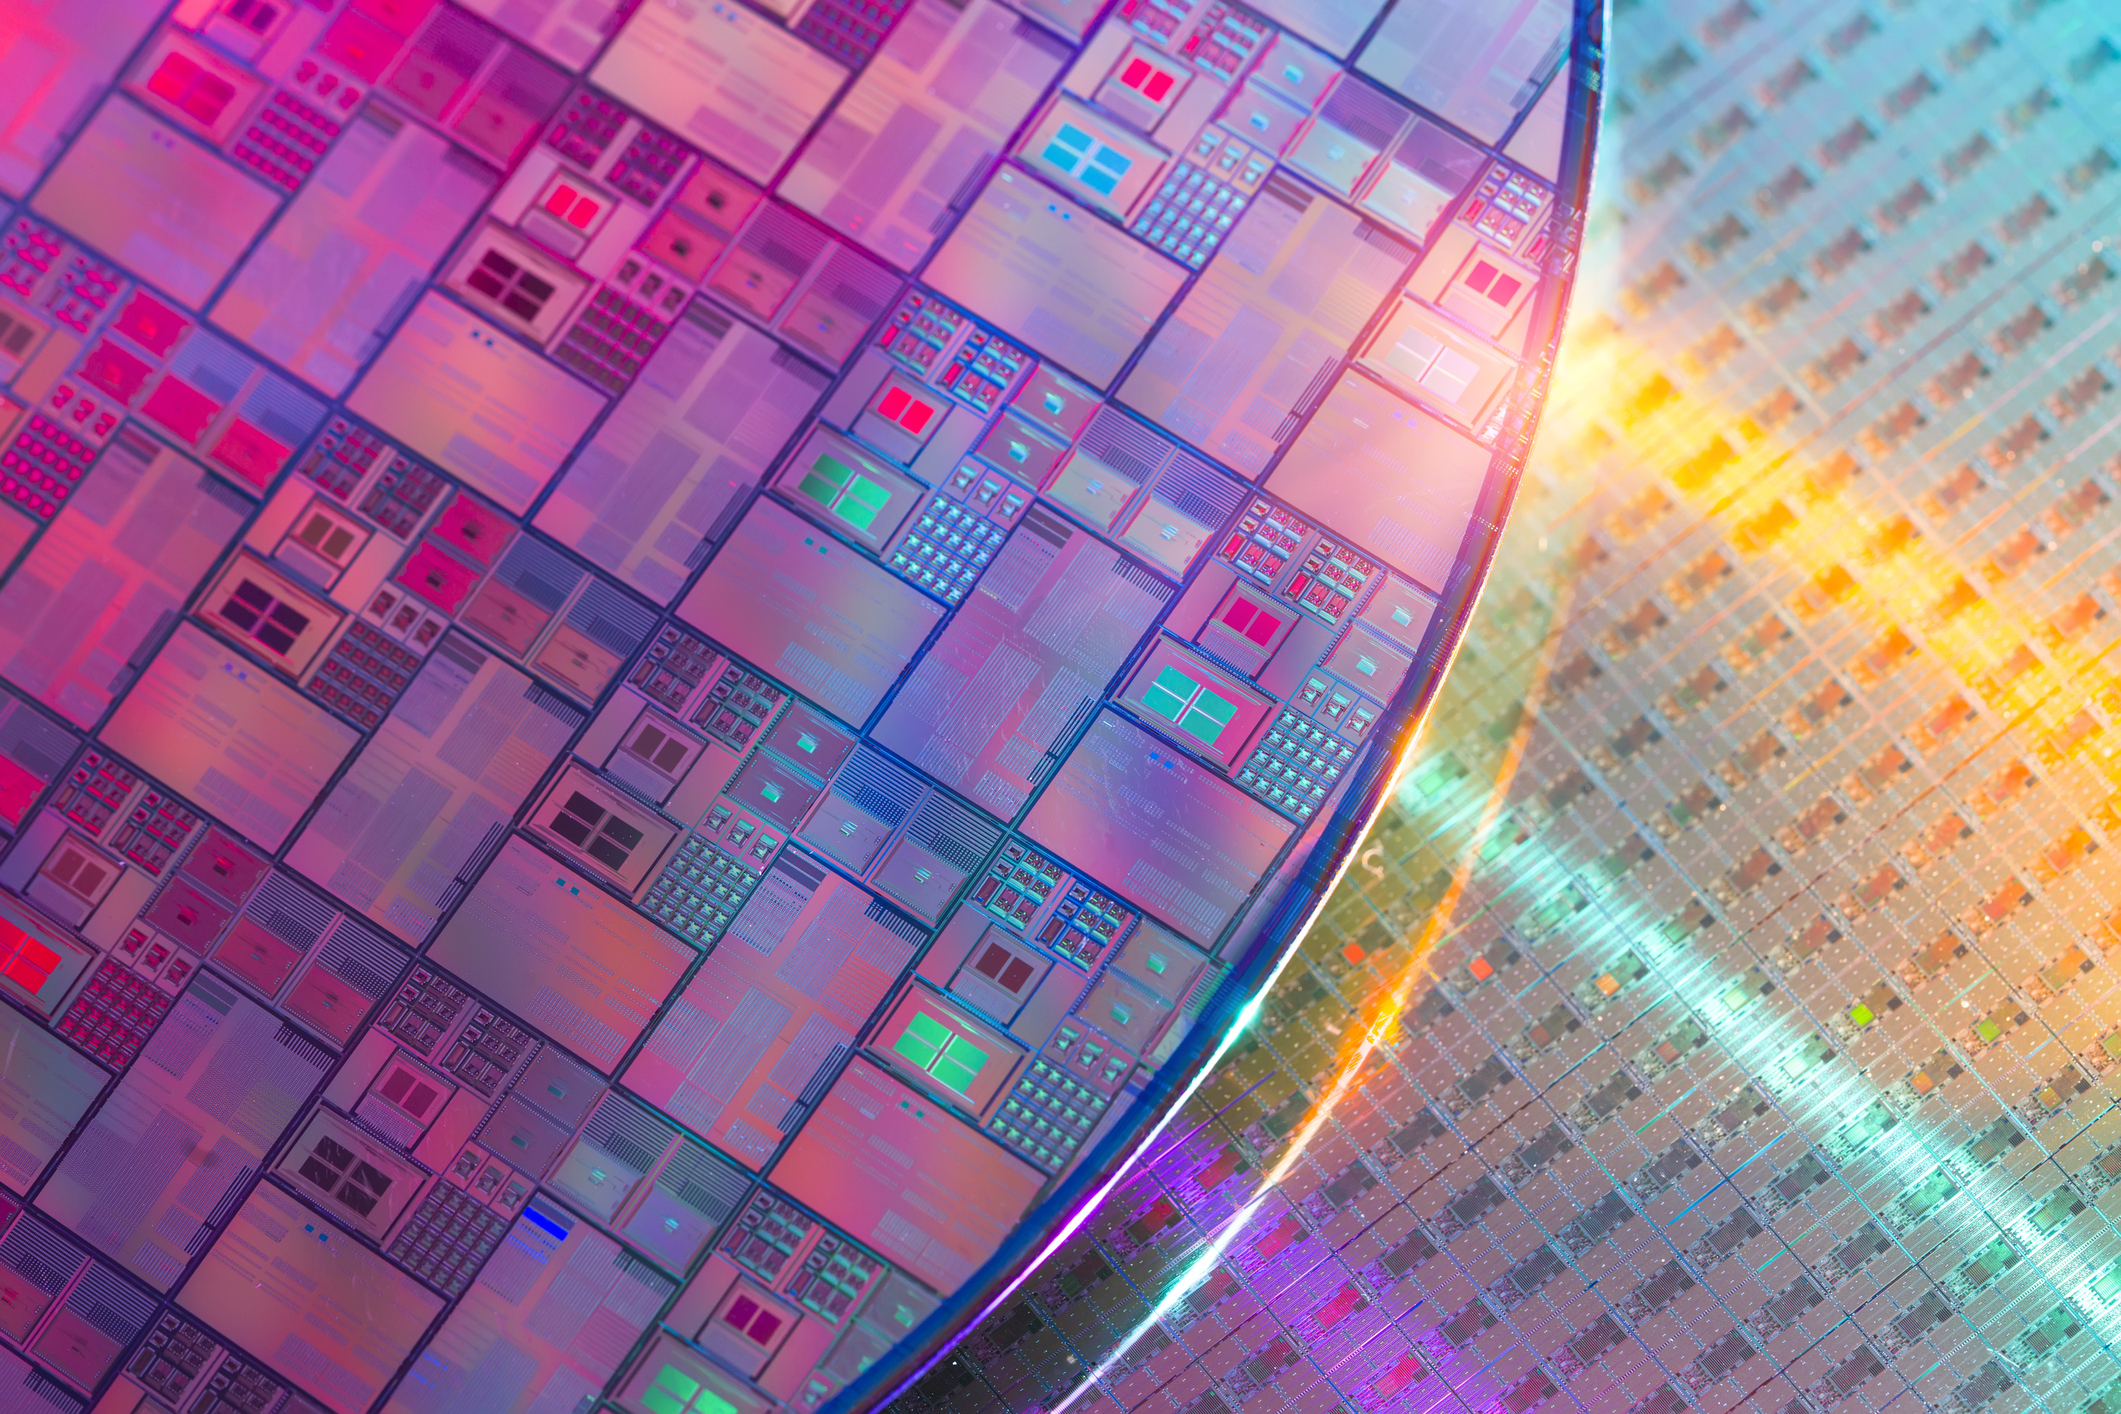 Silicon microchips and circuits on a wafer